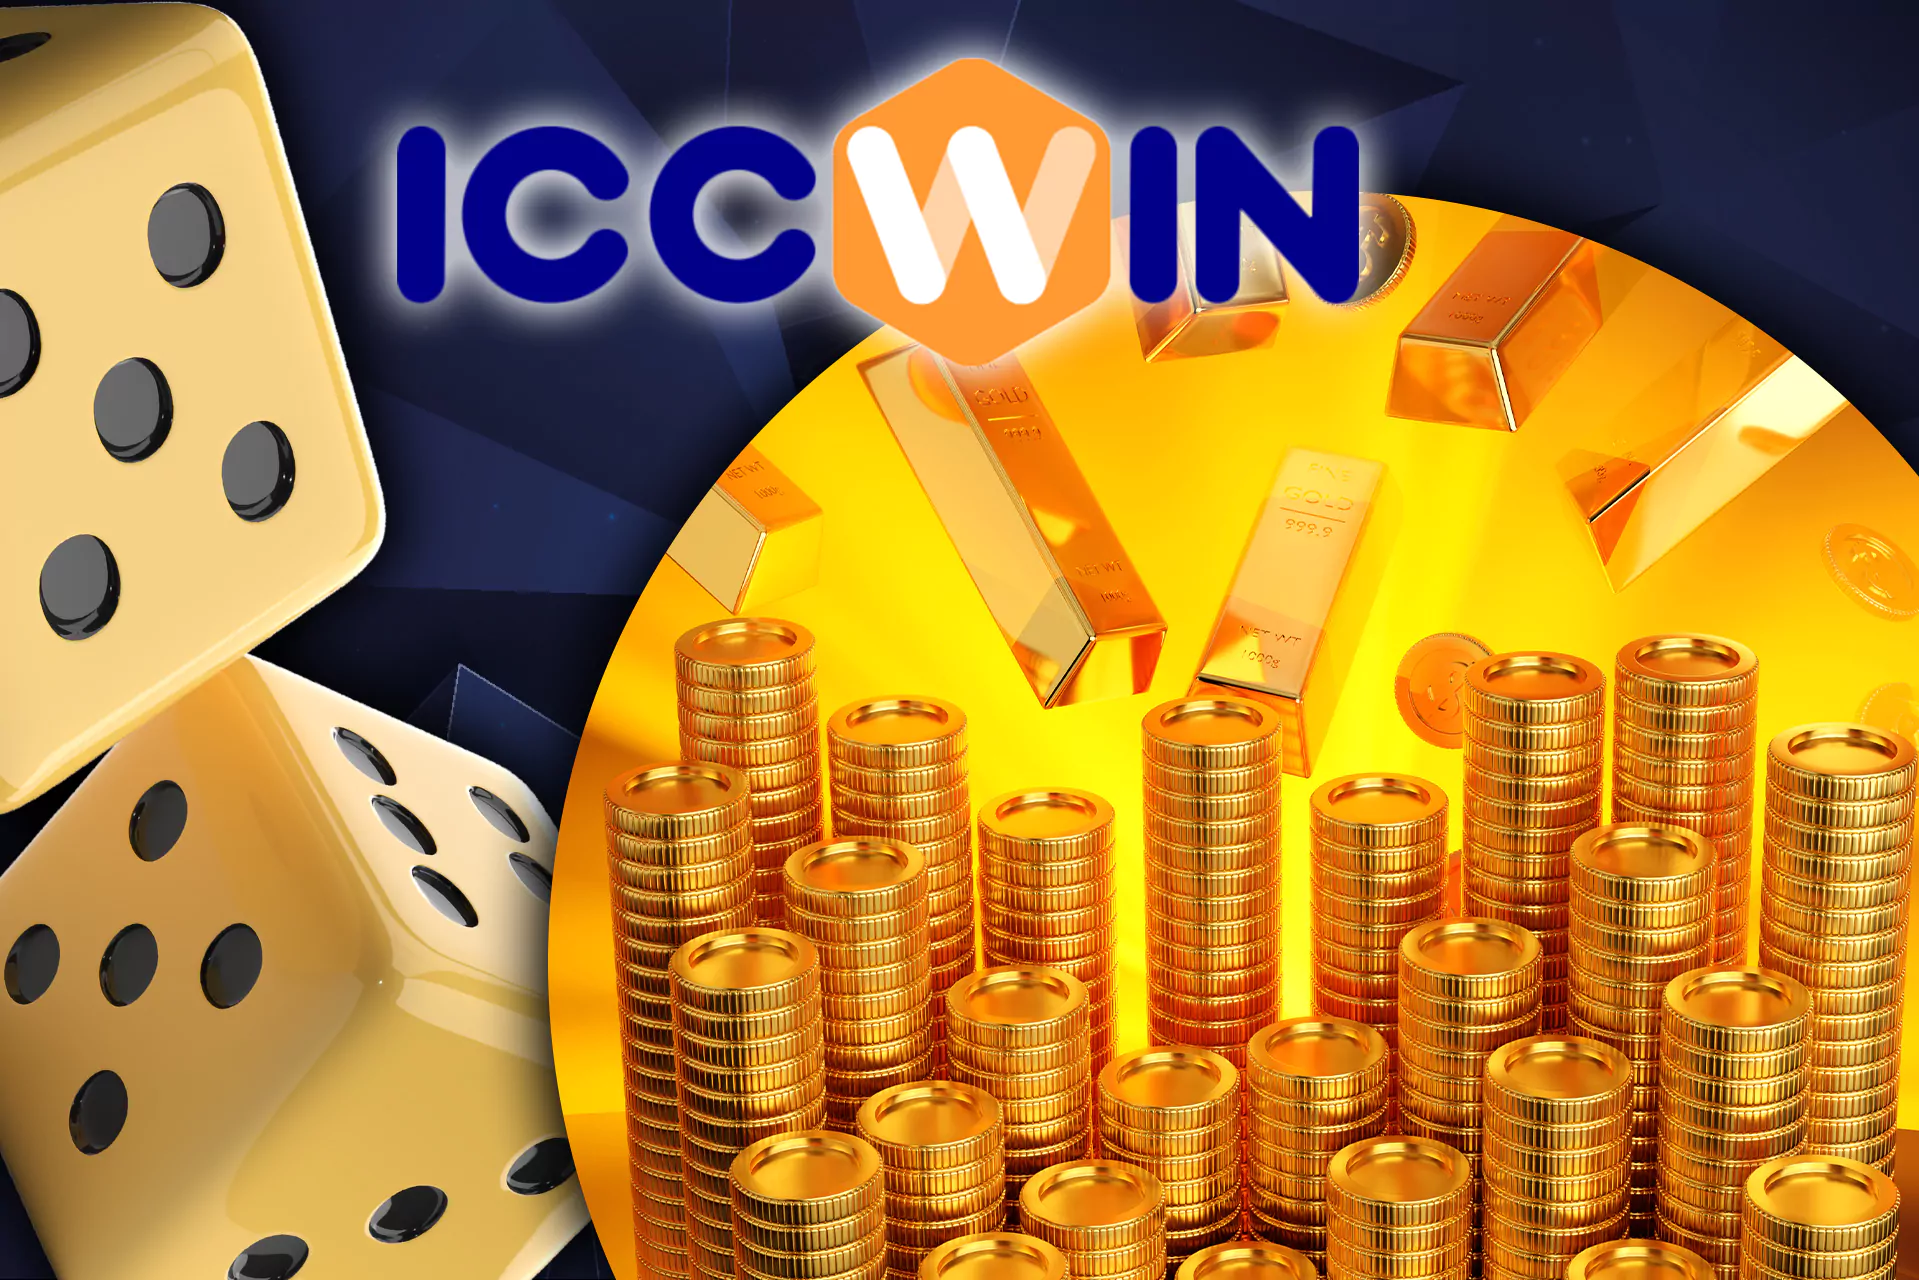 Play jackpot games at ICCWIN caino and win a huge jackpot.